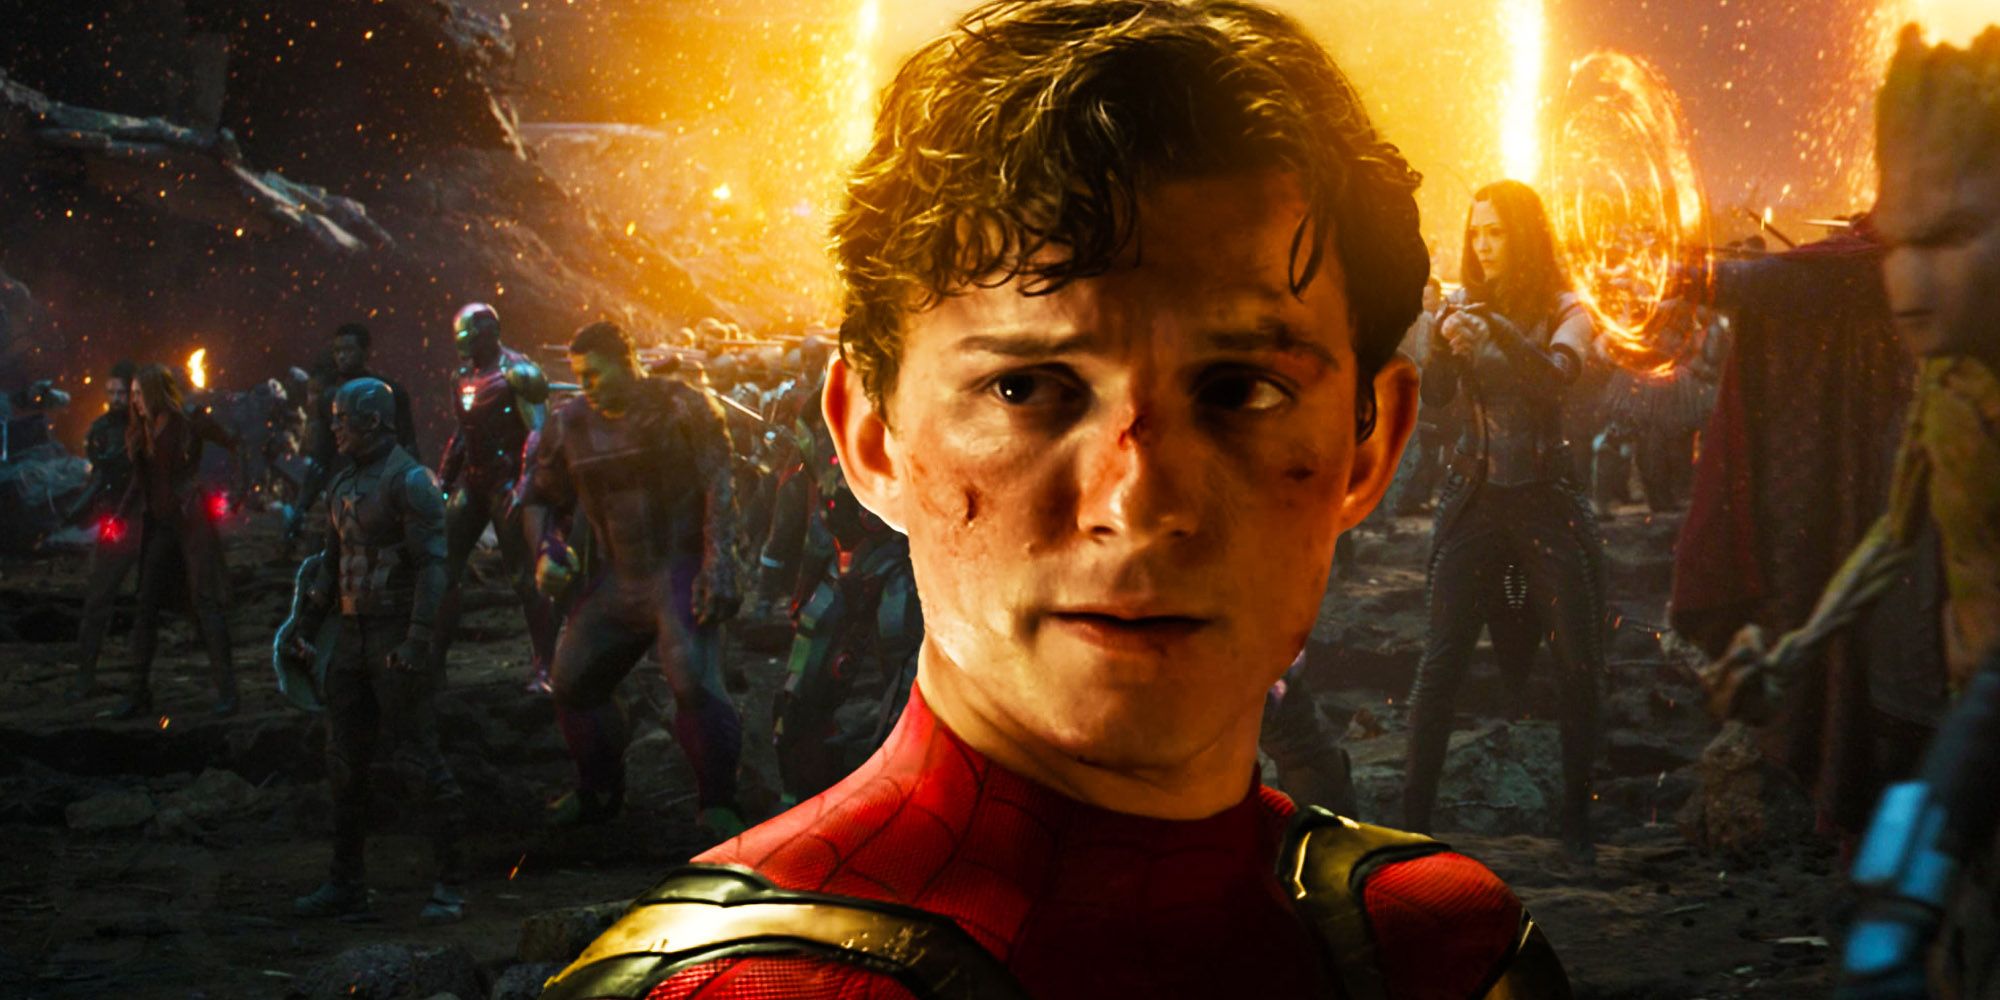 Tom Holland to be lead in Avengers: The Kang Dynasty, says insider